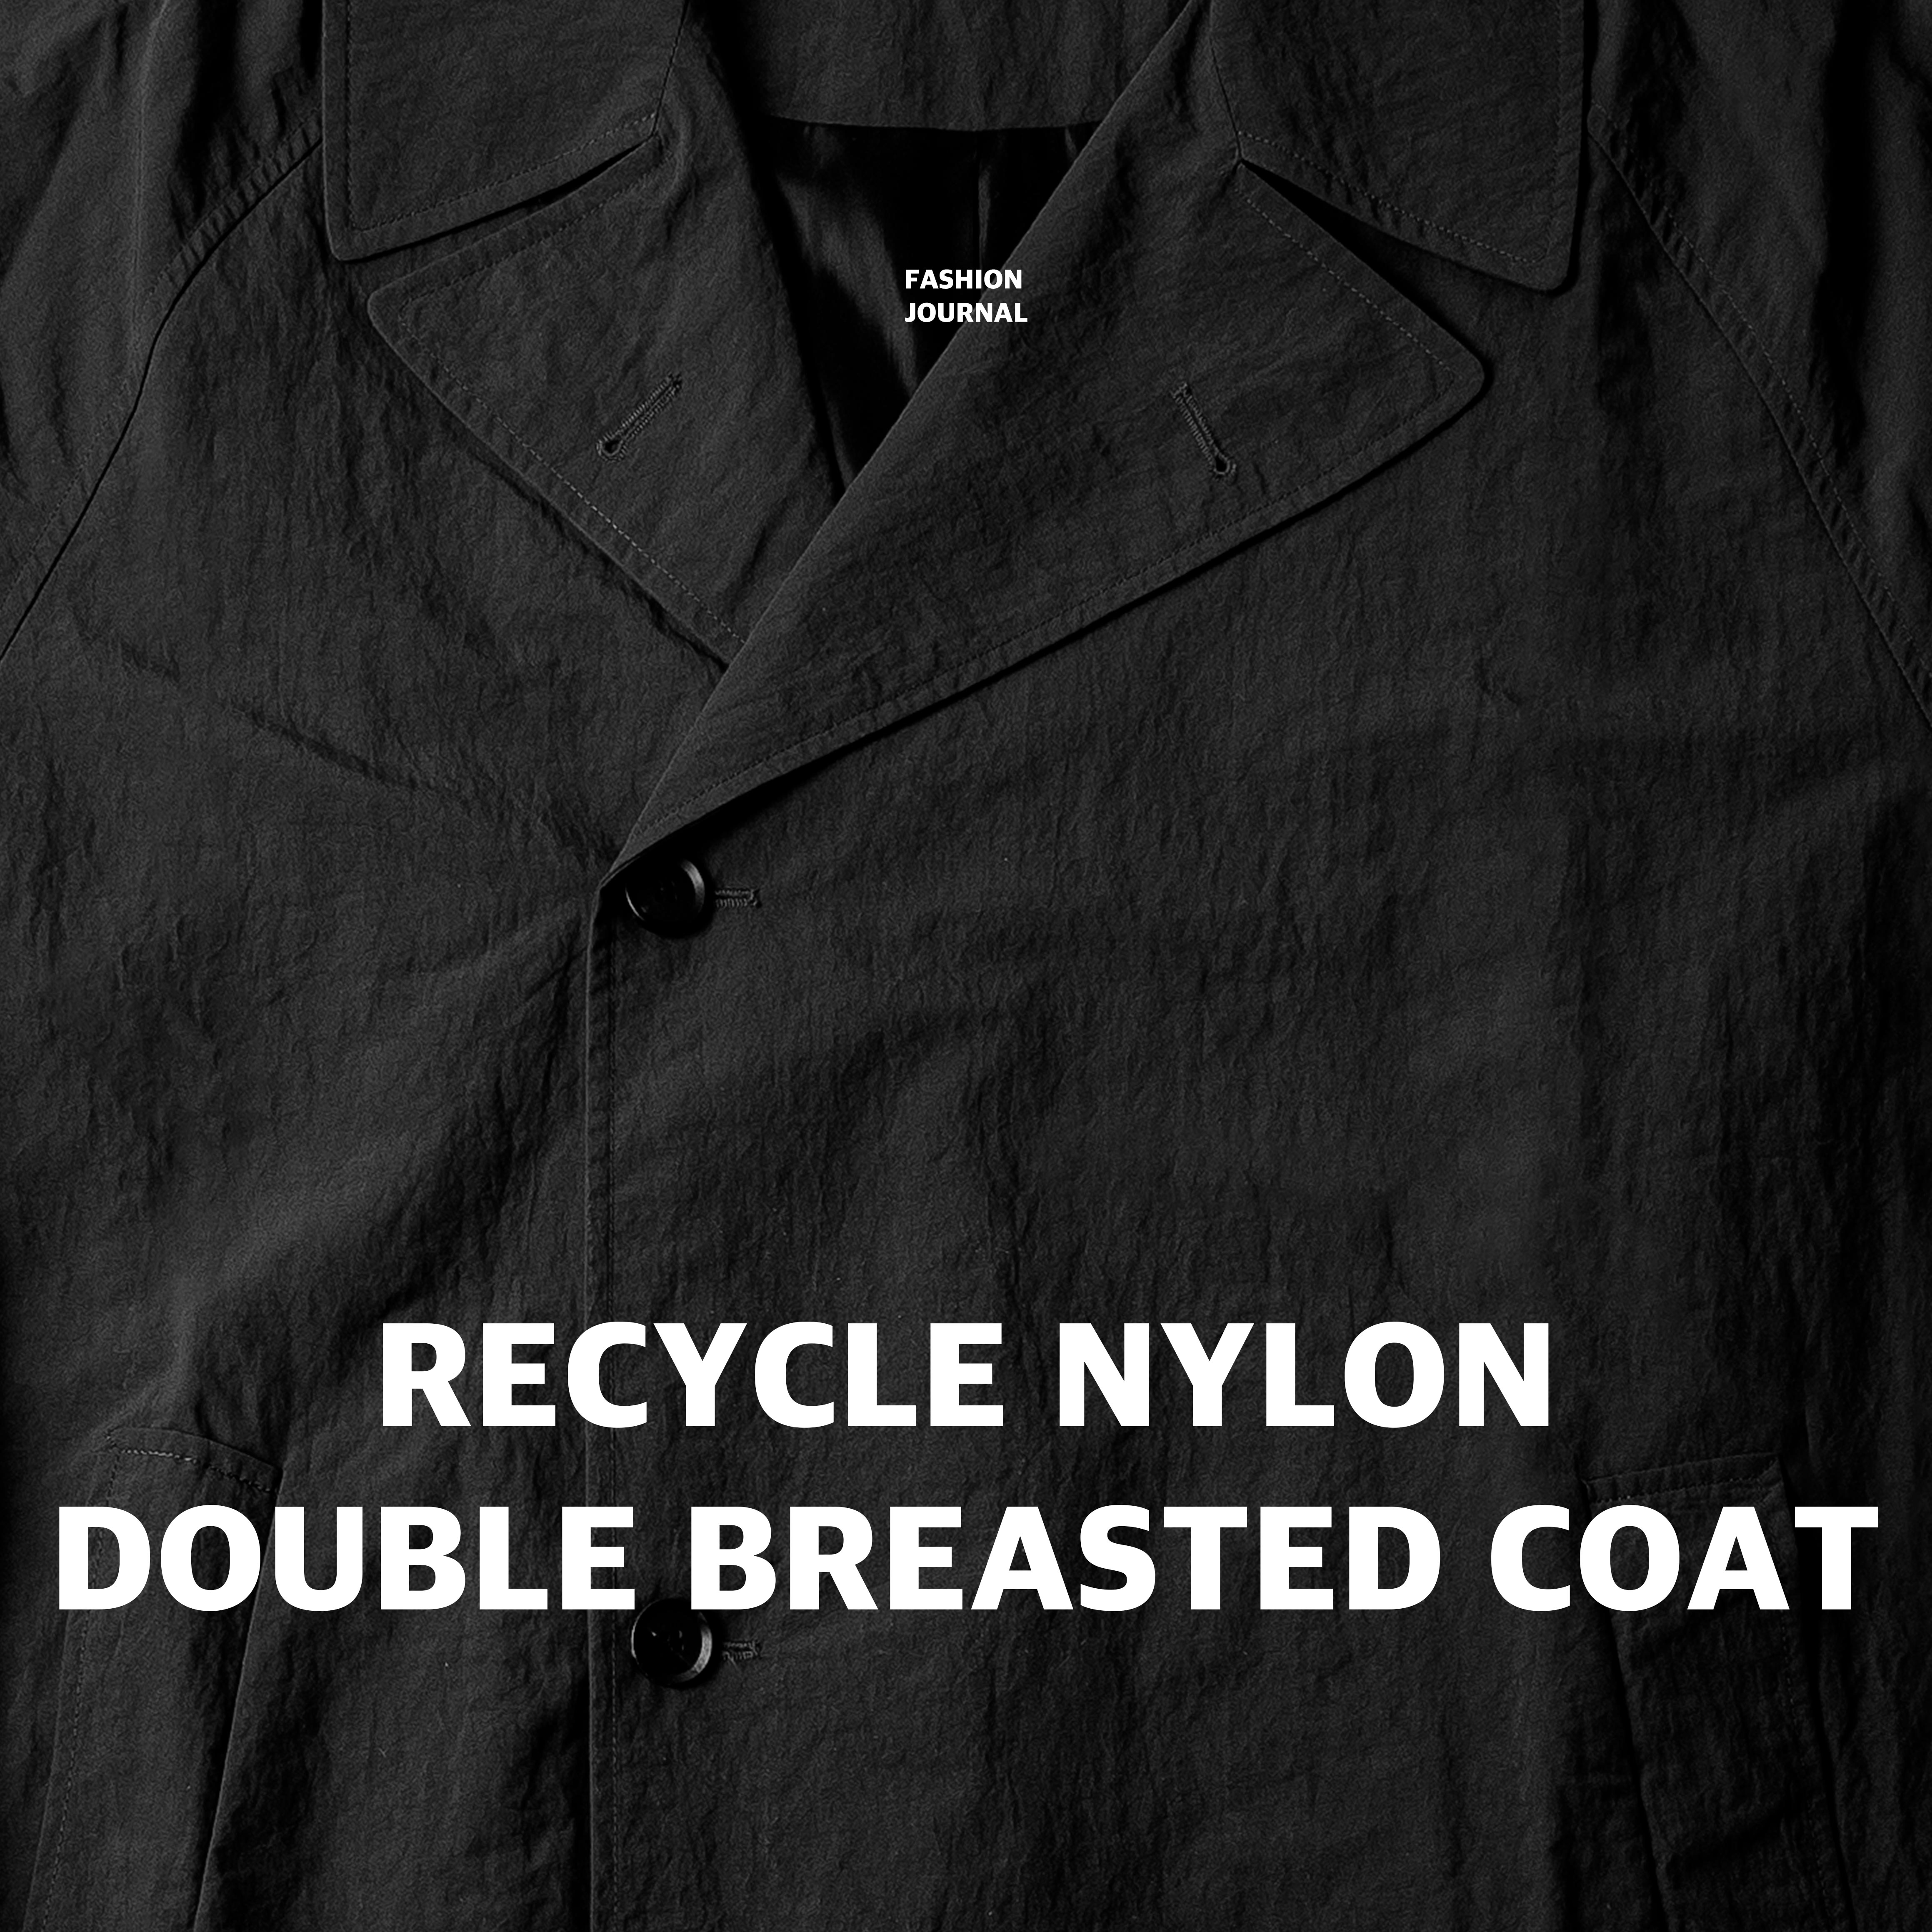 RECYCLE NYLON DOUBLE BREASTED COAT